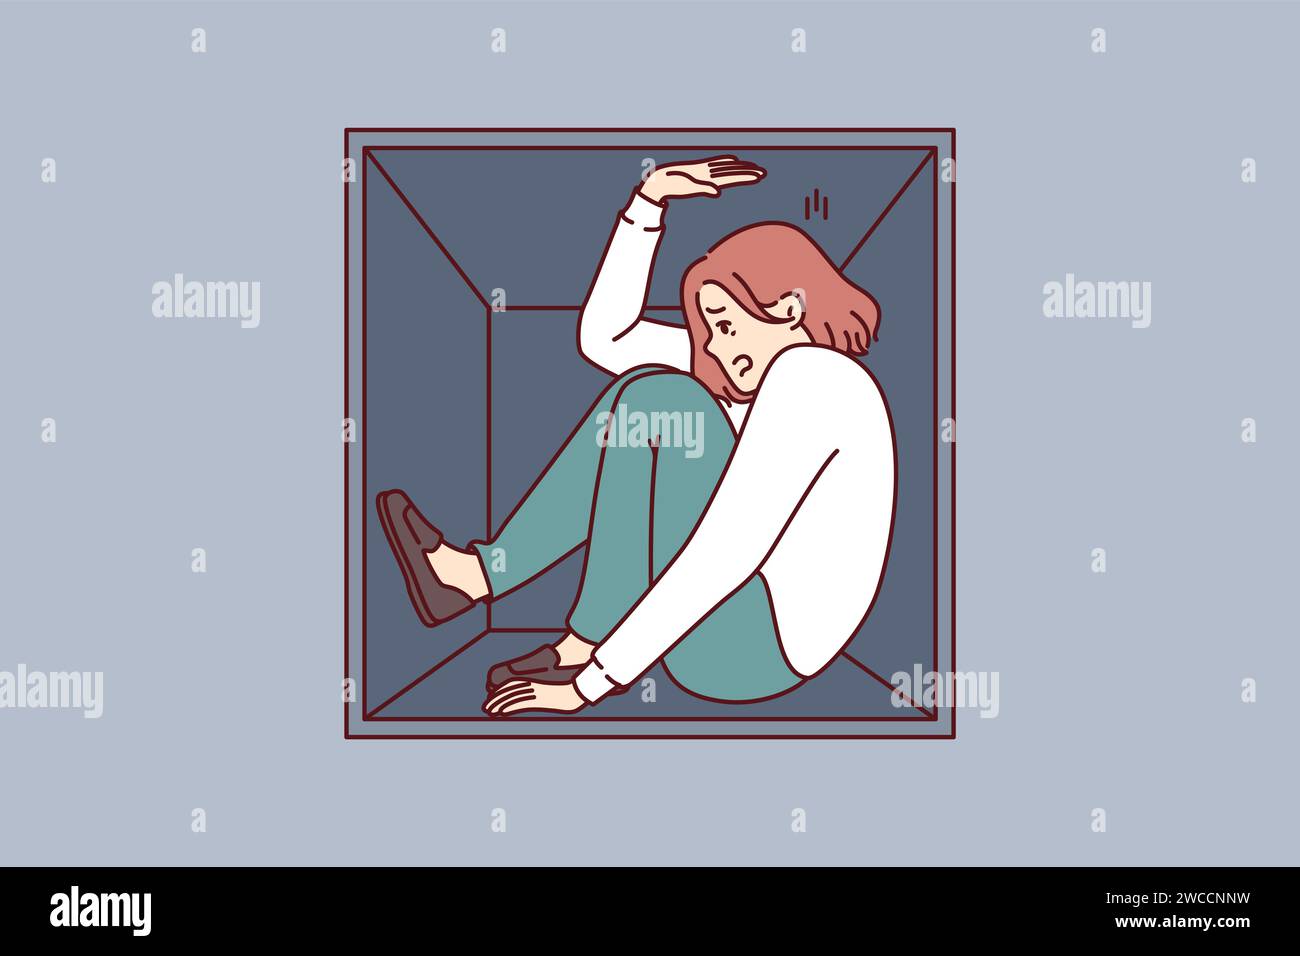 Woman suffering from claustrophobia sits in cramped box and feels pressure of walls, as metaphor for cramped housing. Girl experiences problems due to claustrophobia and fear of closed spaces. Stock Vector